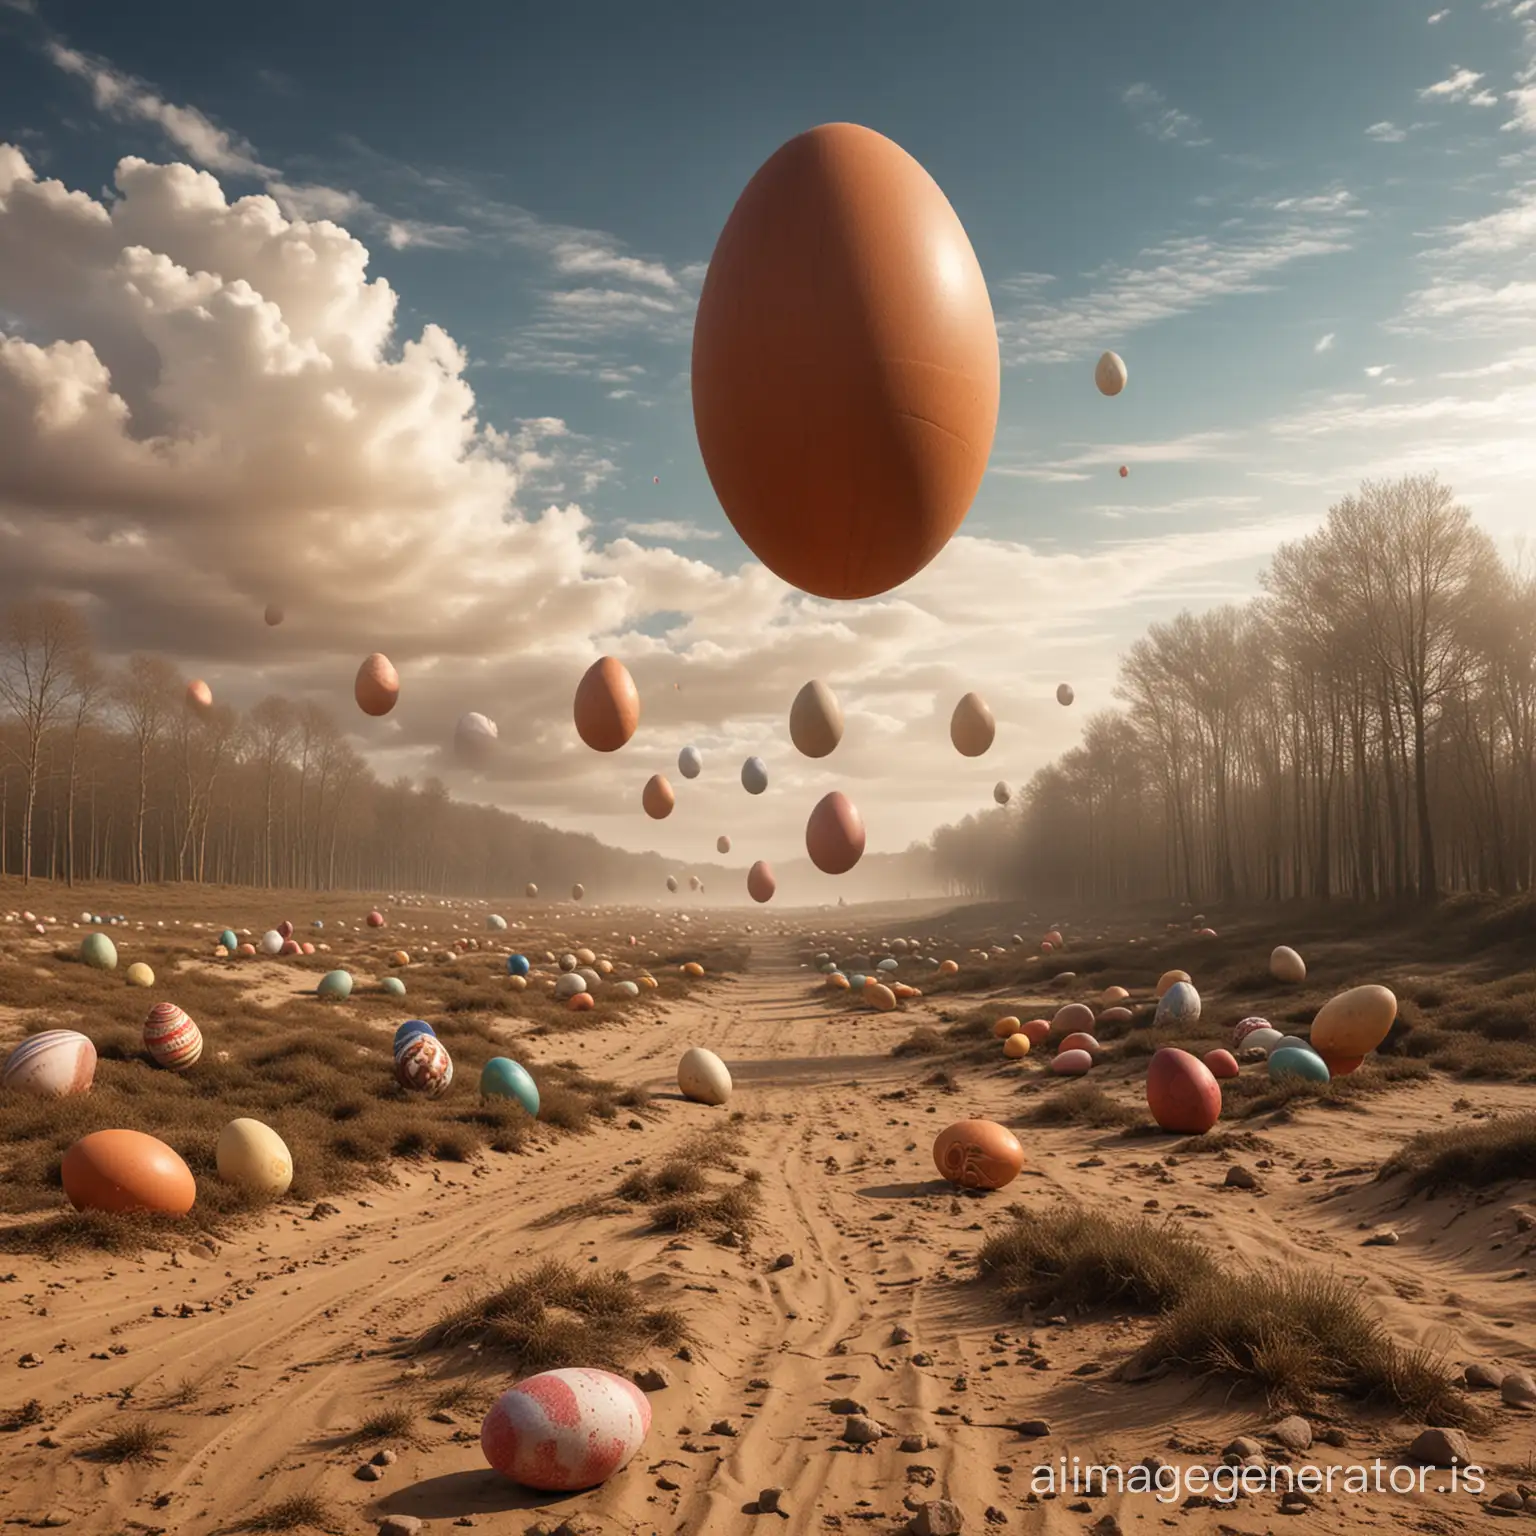 Giant Easter eggs of various sizes and materials flying in the sky. On the ground, countryside and forest. It looks like a scene from Dune.